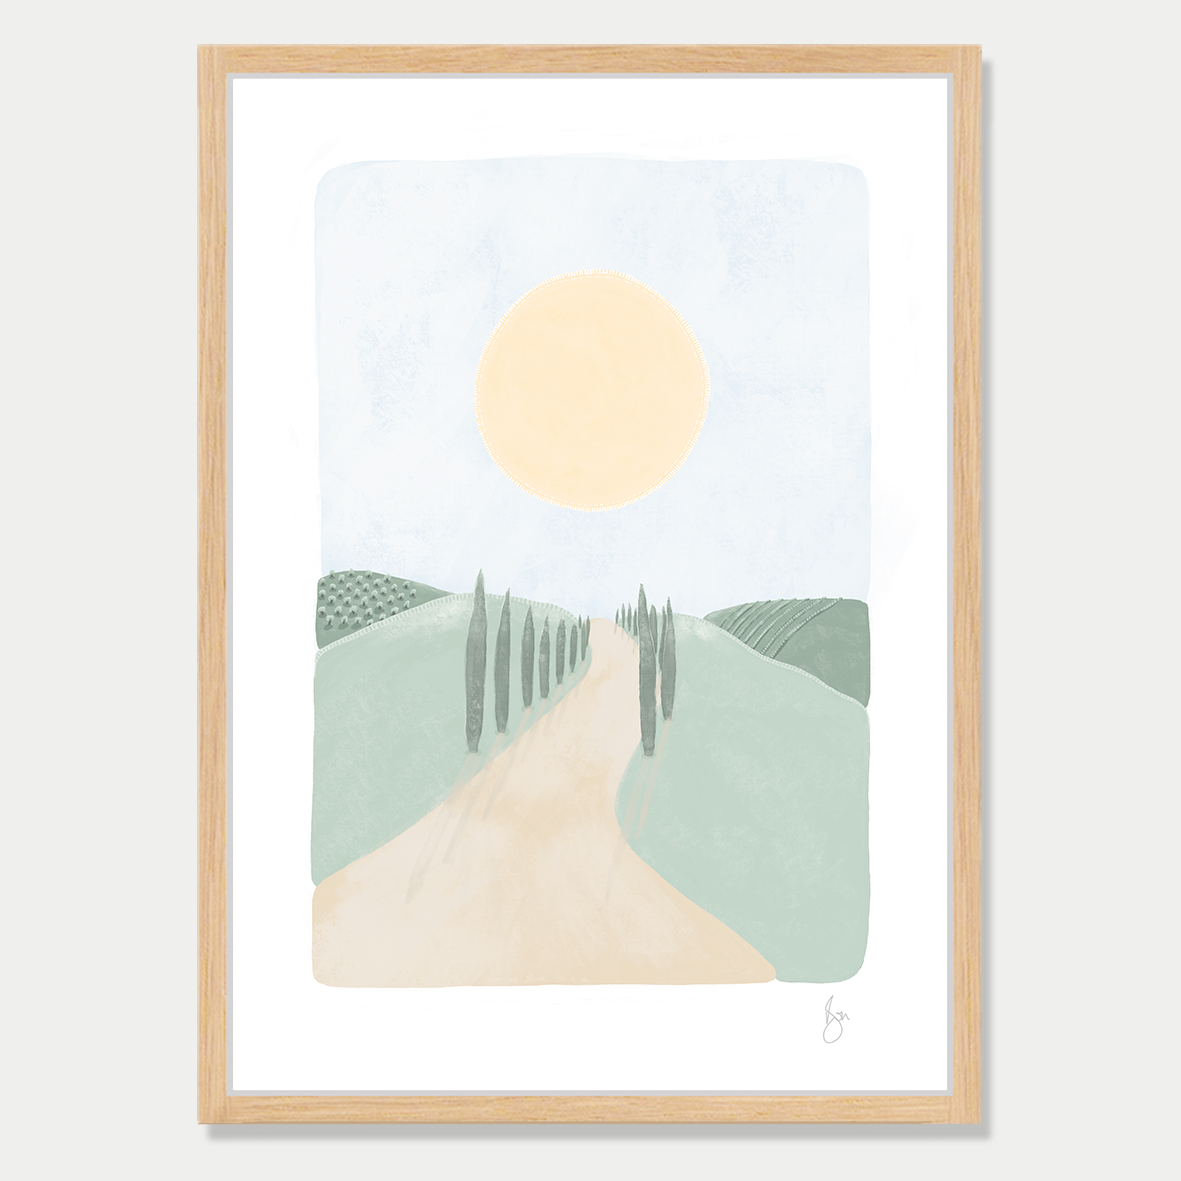 Art print of the Tuscan countryside with a large sun, by Bon Jung. Printed in New Zealand by endemicworld and framed in raw oak.